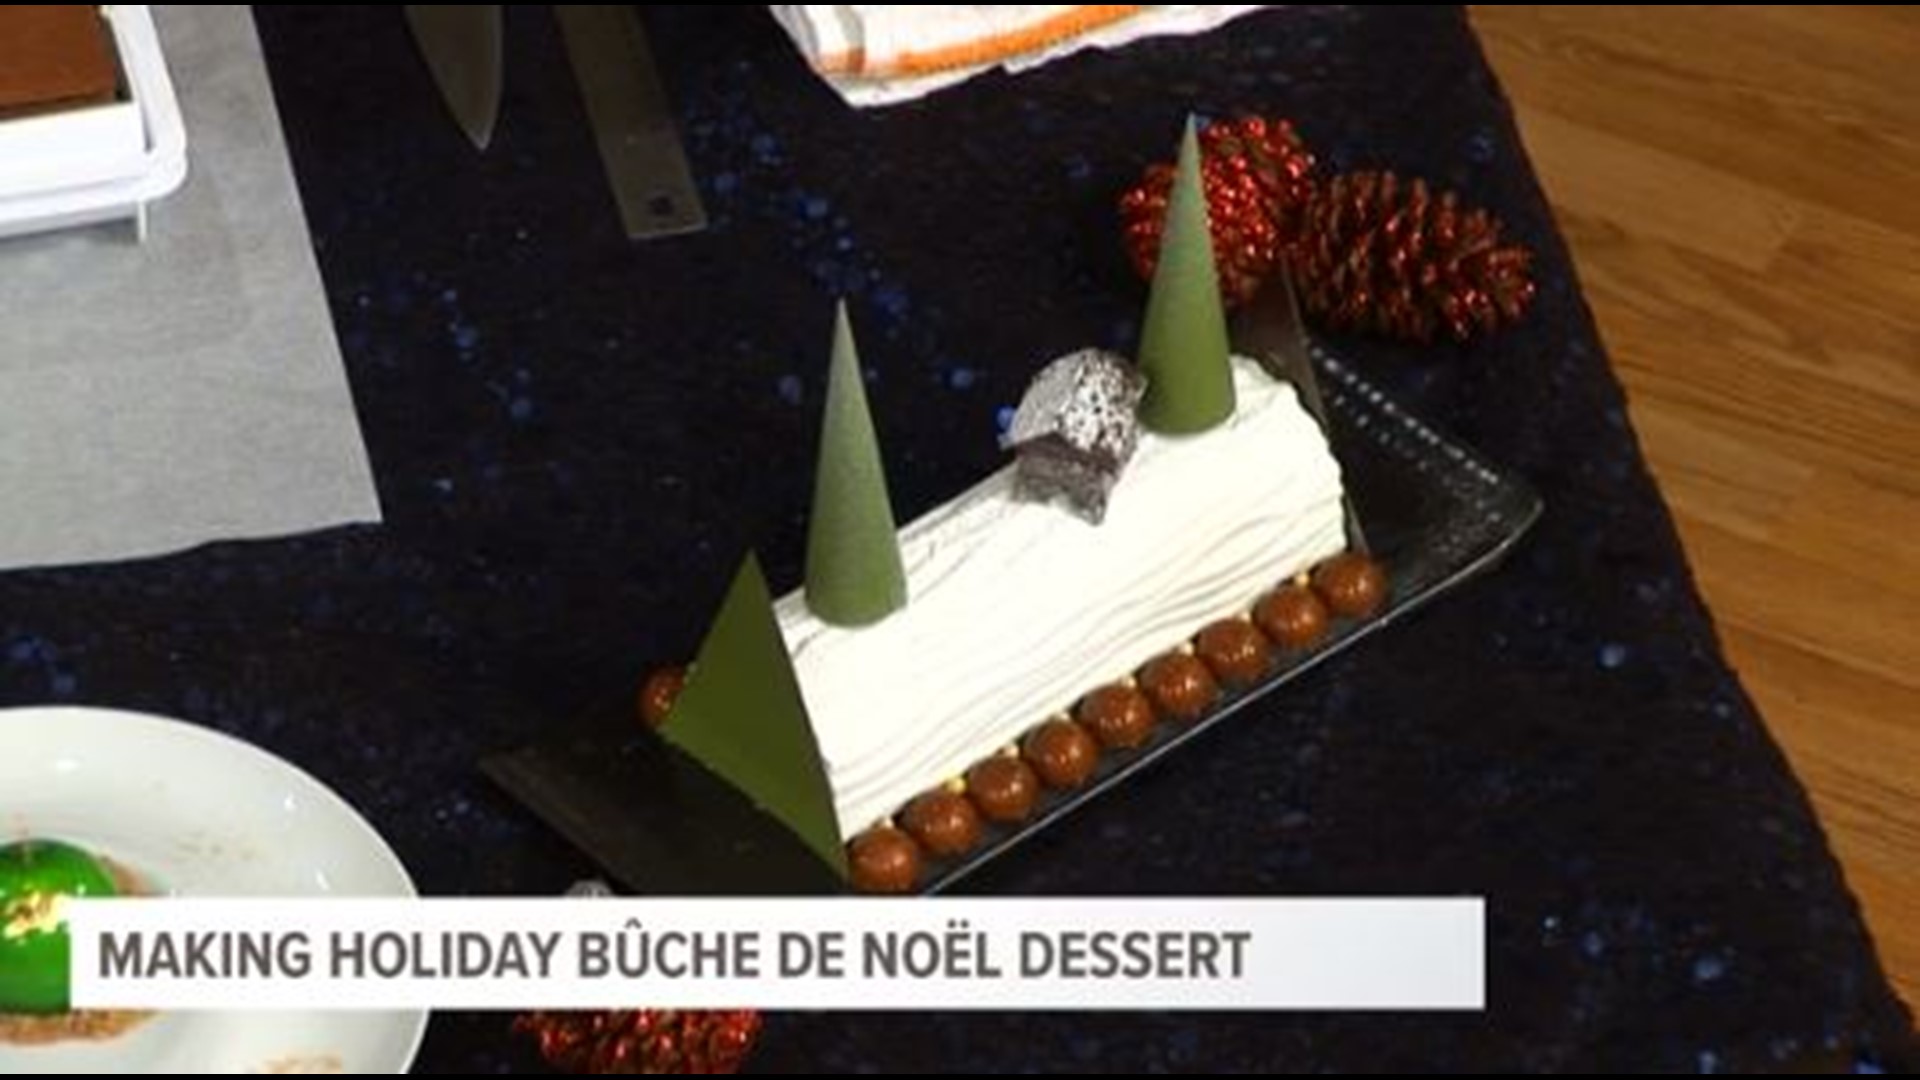 Pastry chef Nicholas Pine of 2941 Restaurant stopped by to show us how to make an elegant Bûche de Noël cake at home!